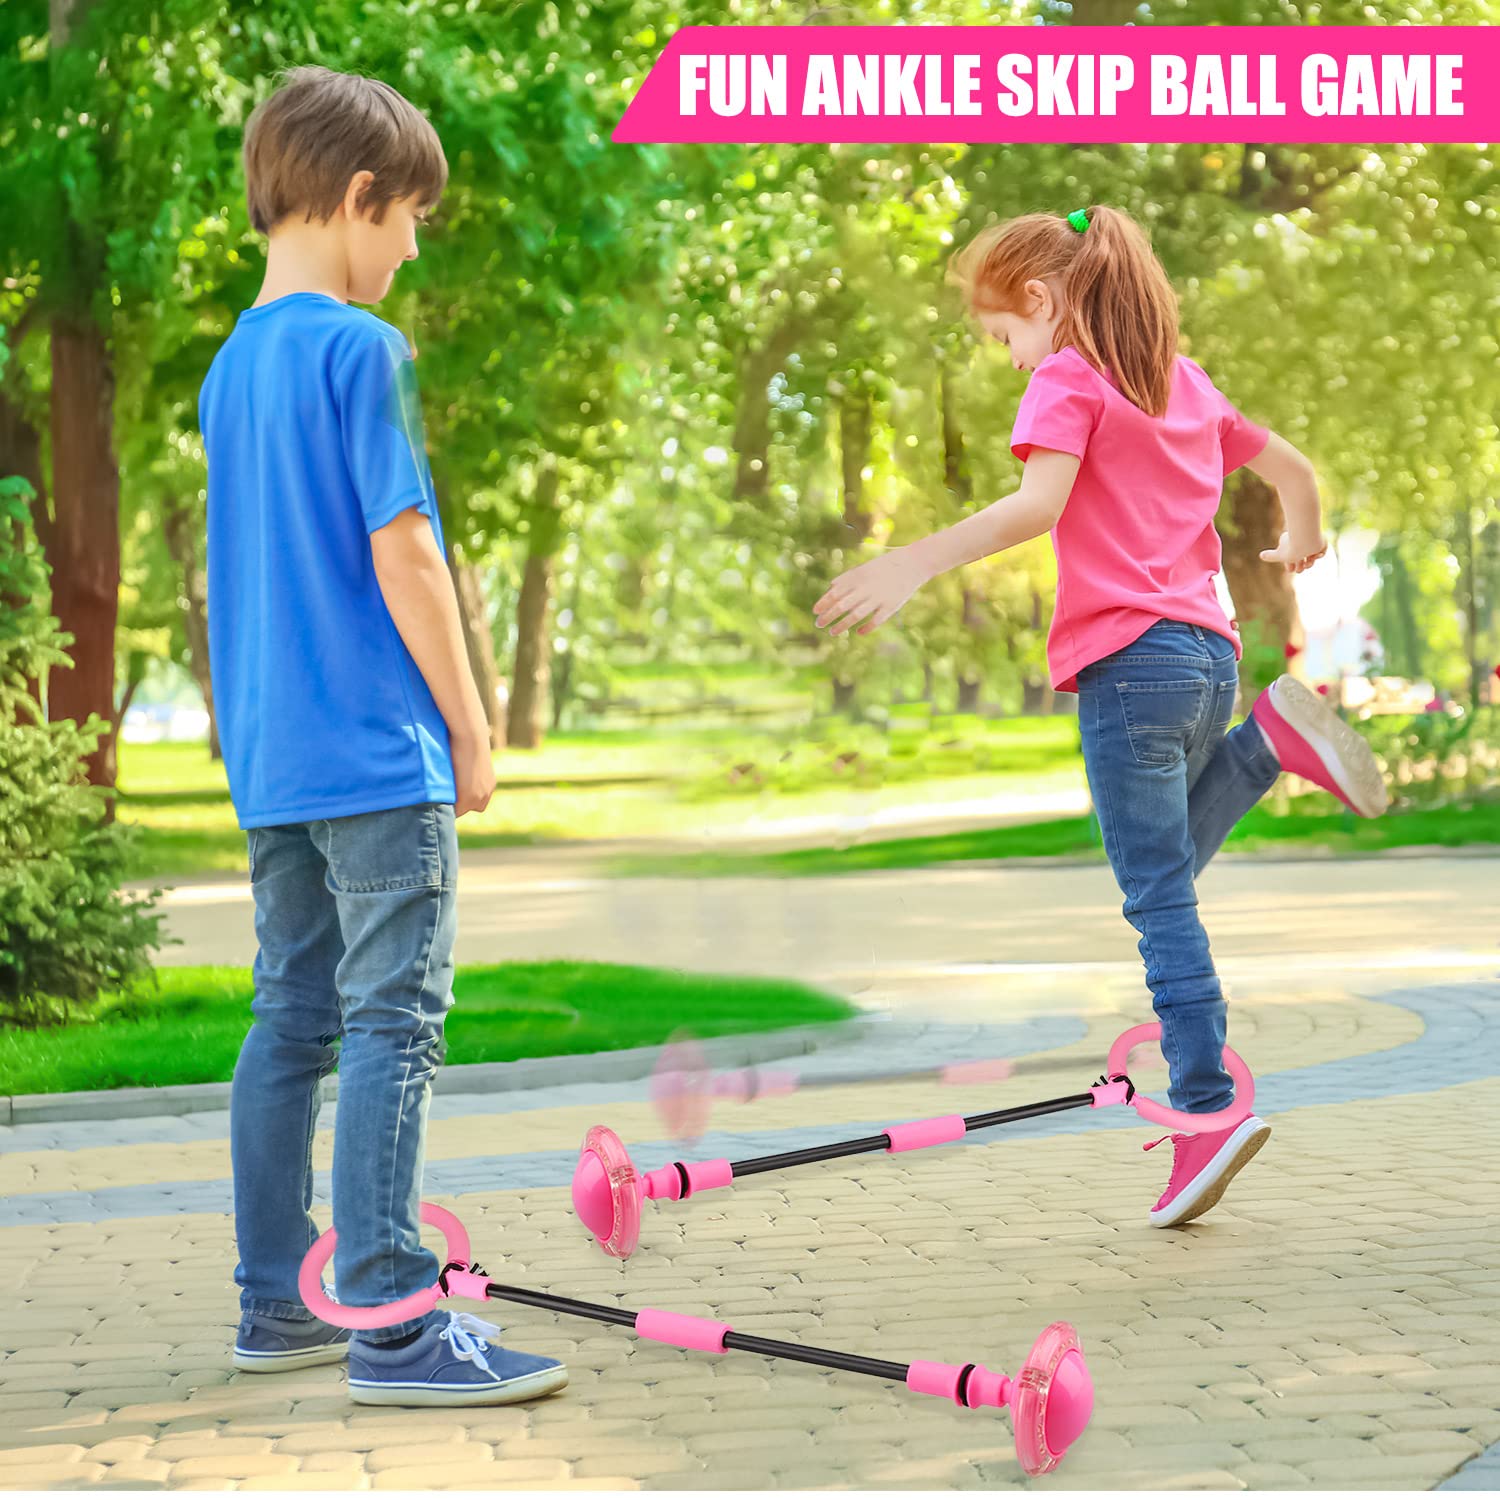 Chridark Ankle Skip Ball for Kids - Foldable Flash Wheel Skip Ball, Outside Game Toys for Kids & Adults, Gift for Boys & Girls Age 5 6 7 8 9 10 Years Old